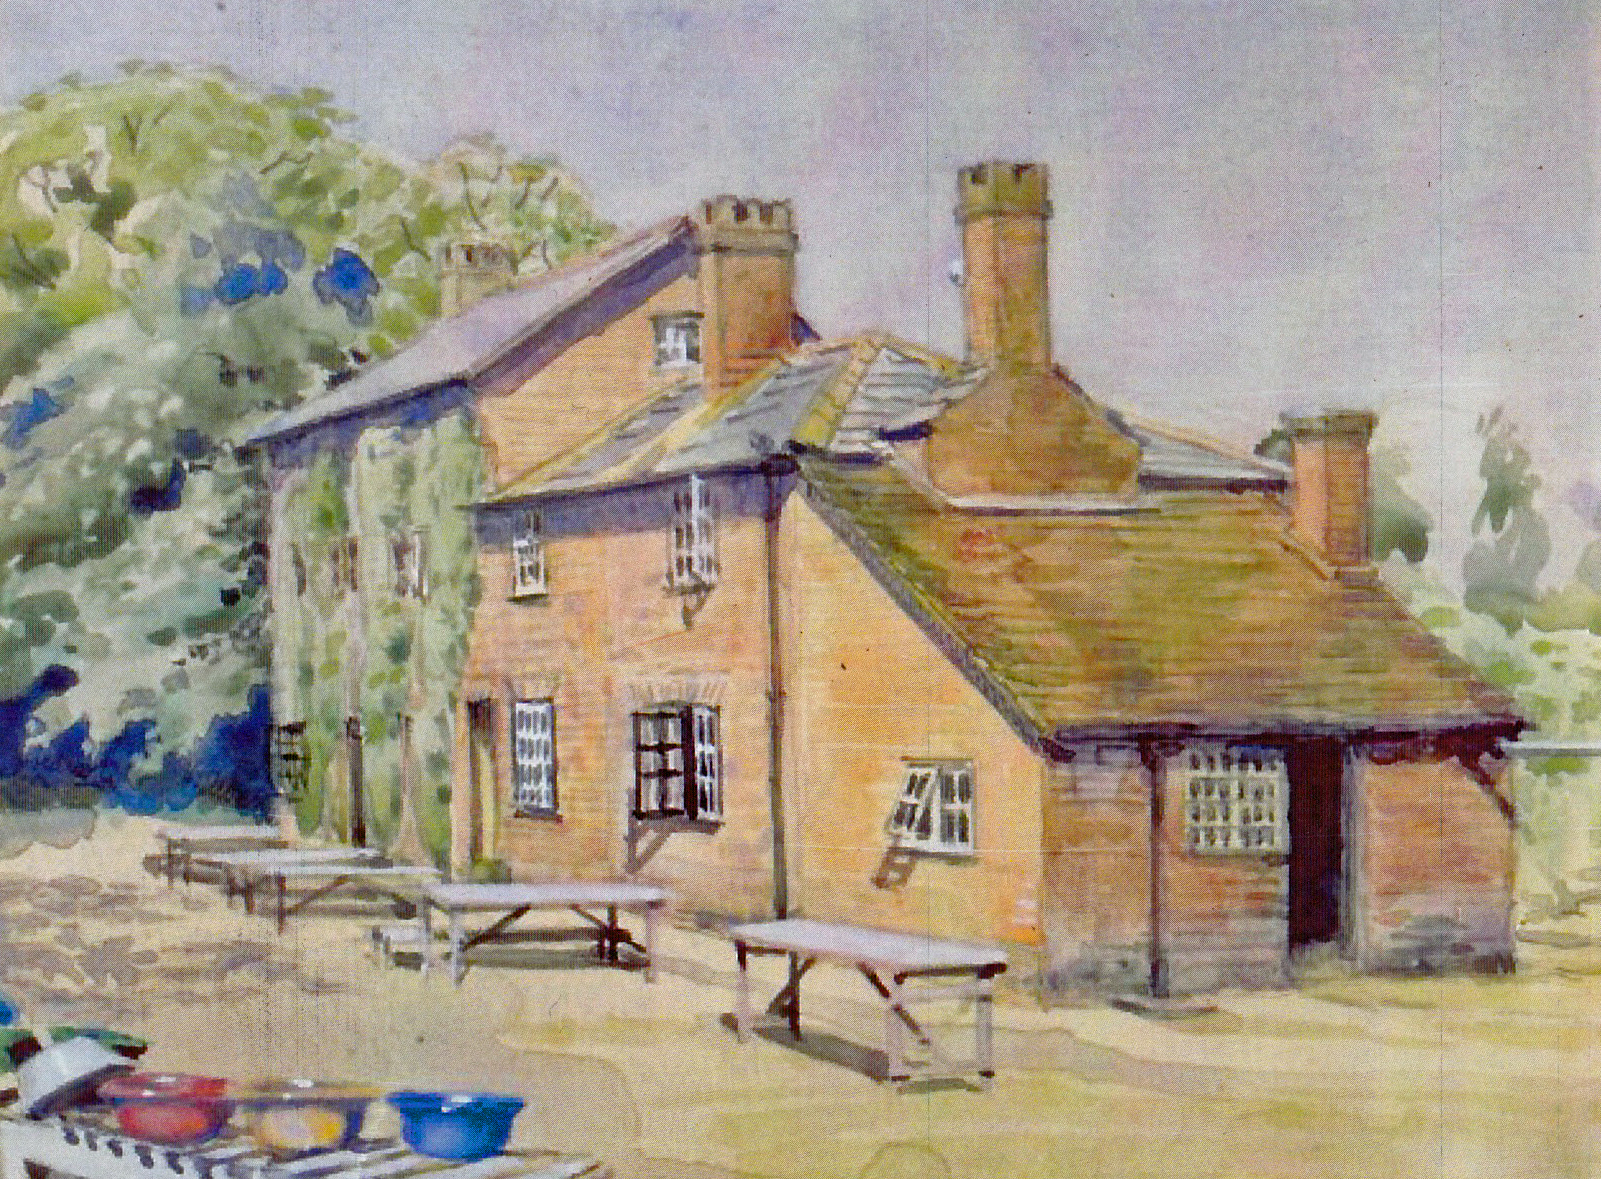 Painting of the Mill